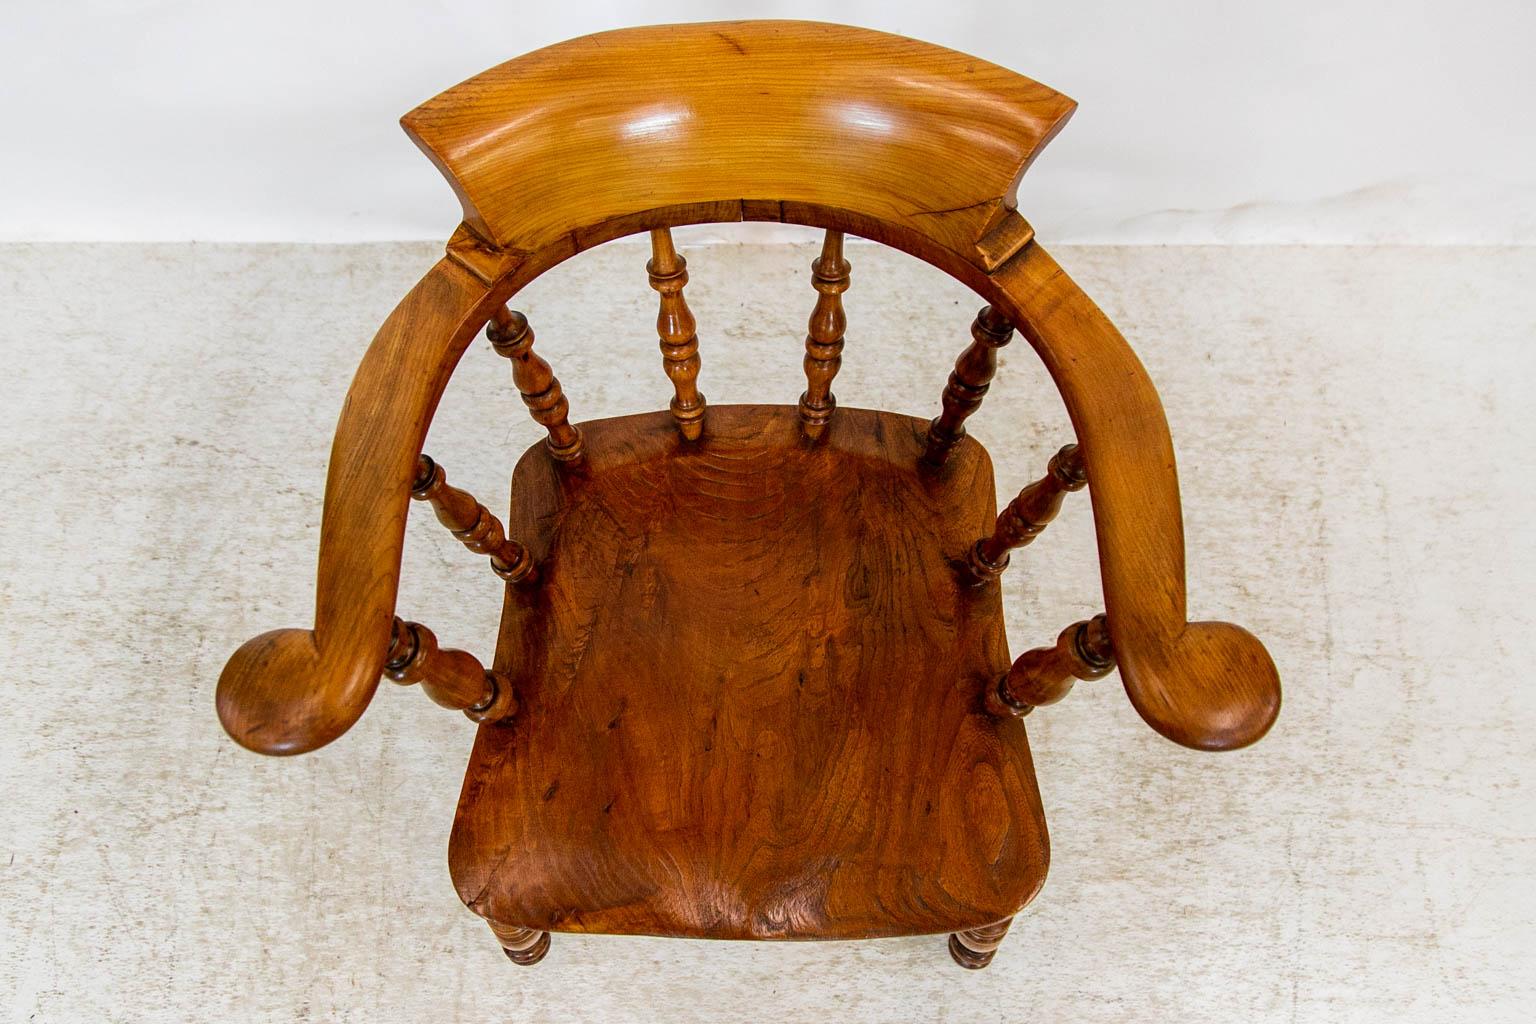 This captain's chair has scrolled arms and a flared back rest. The arms are supported by four turned spindles. The elm seat has a slight saddle shaping. The four turned legs are connected by a turned 